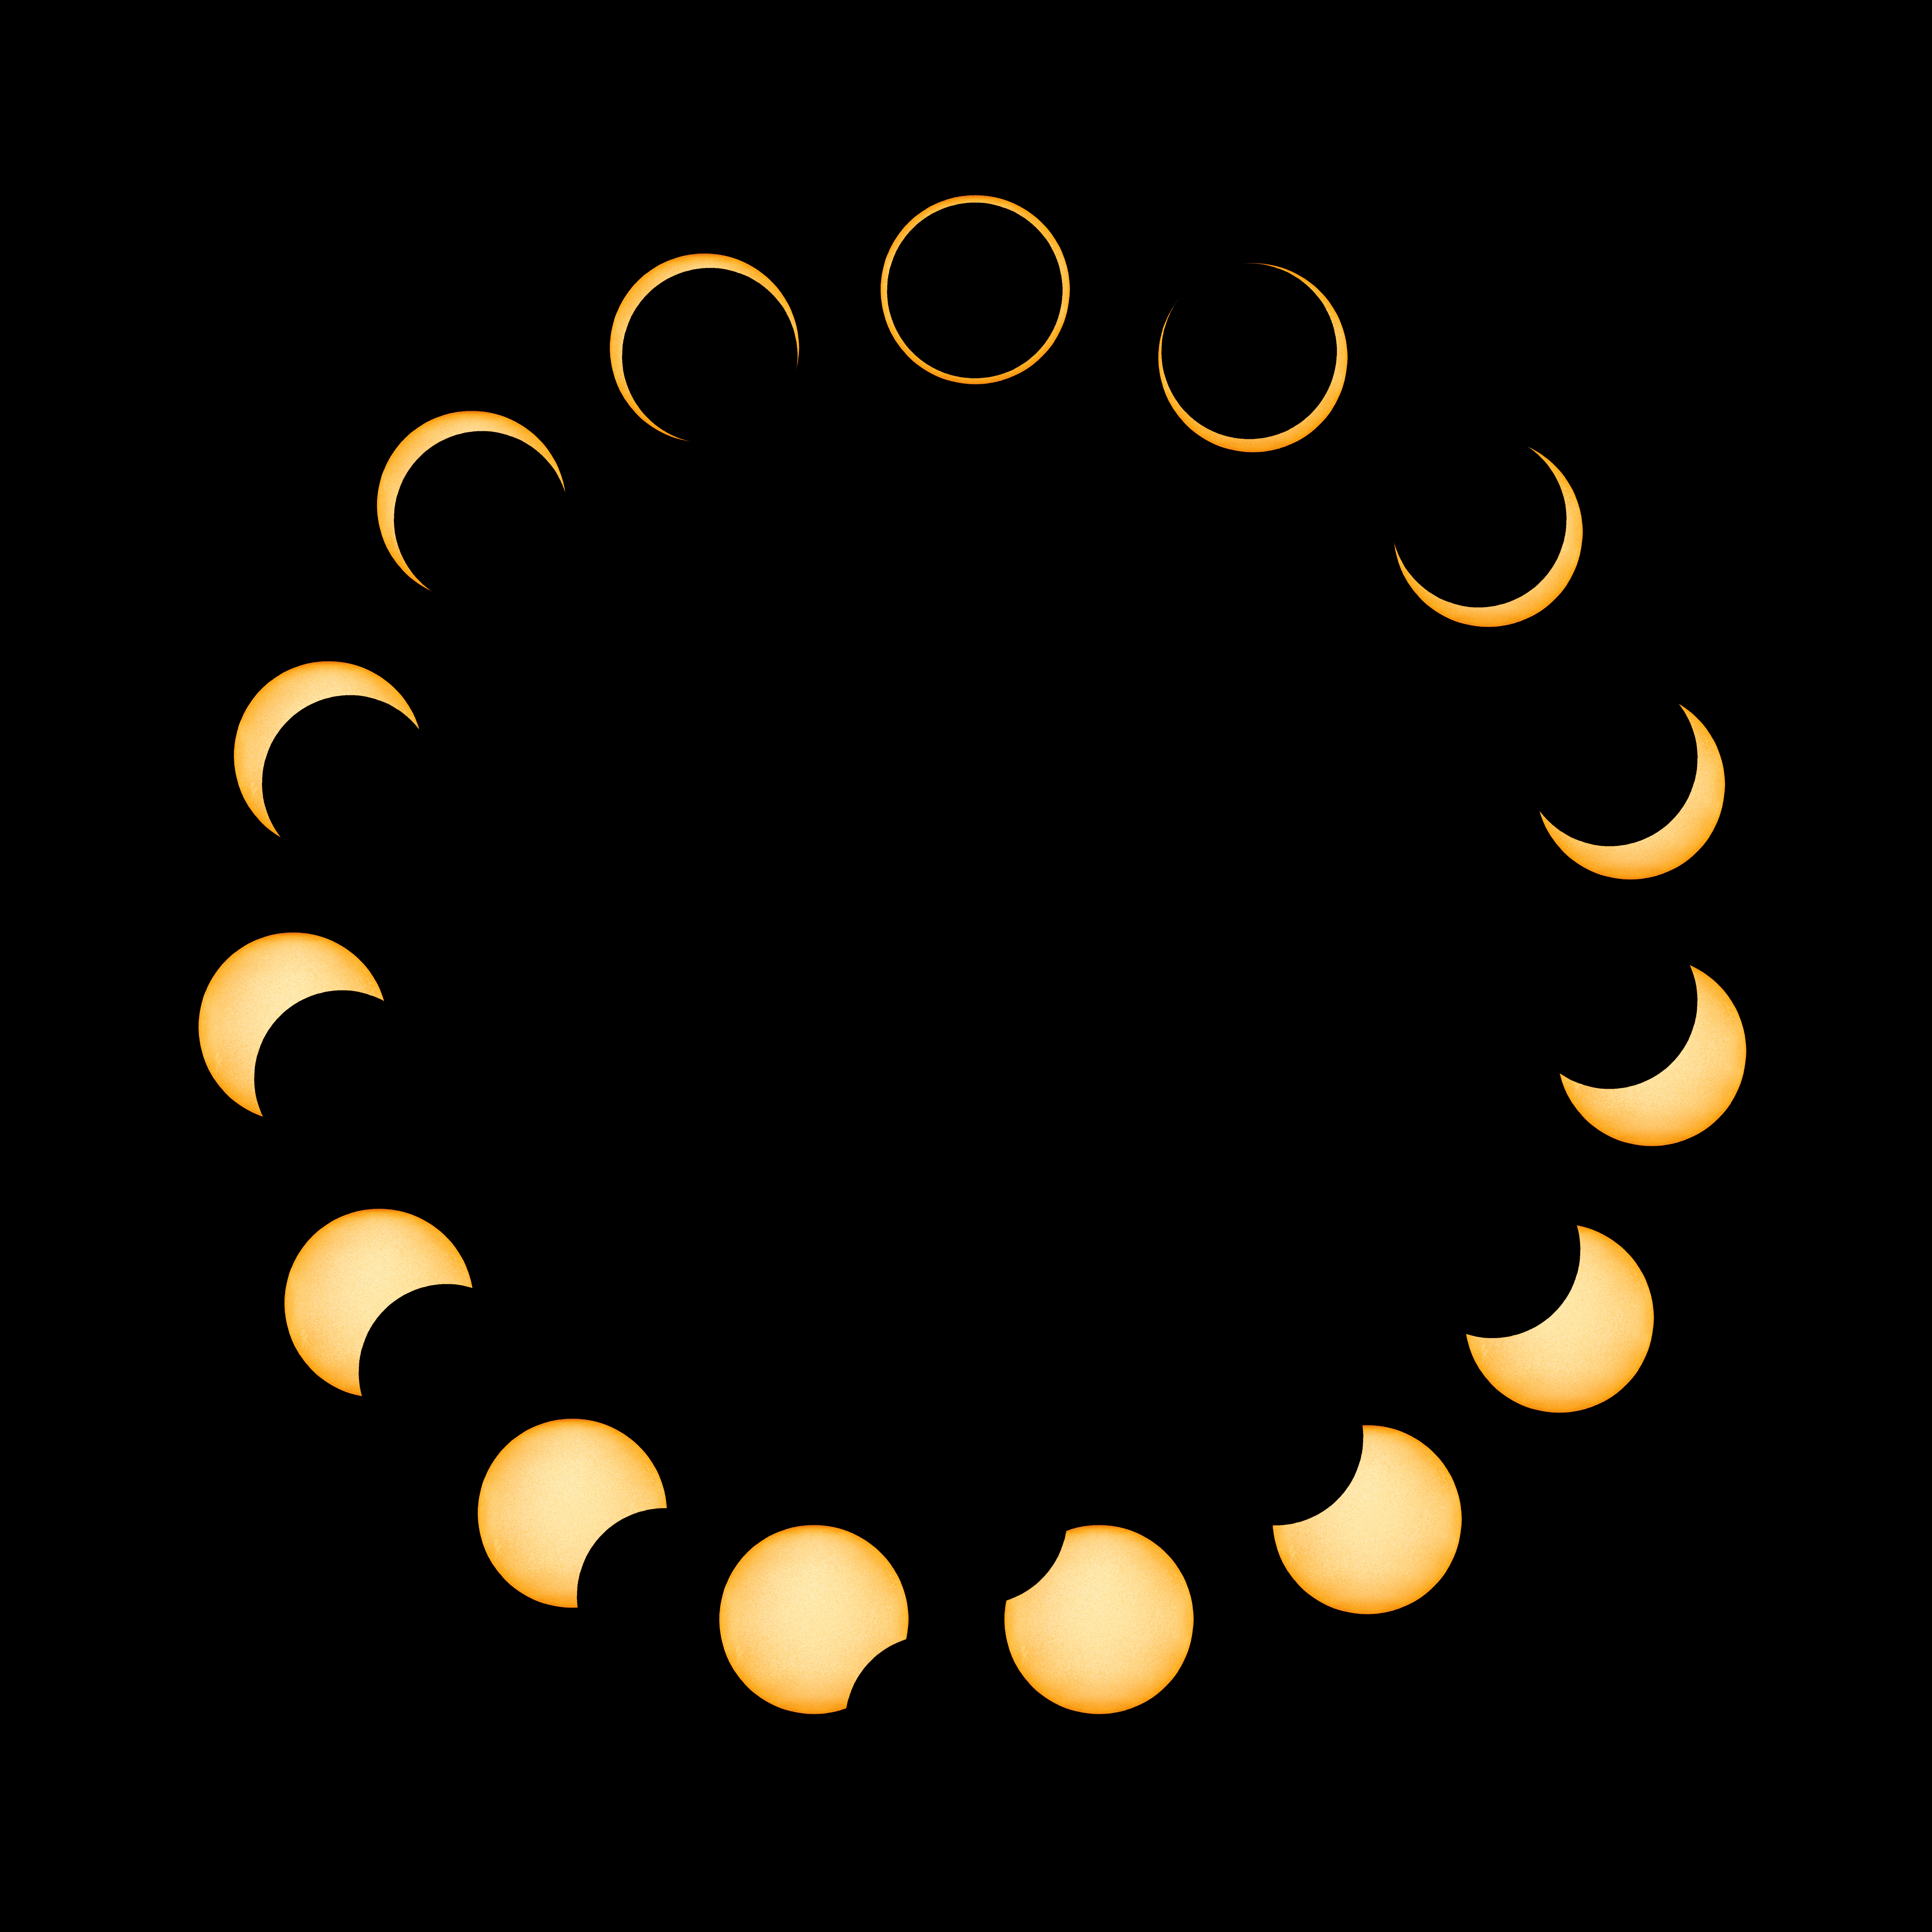 Annular "Ring of Fire" Eclipse Cycle